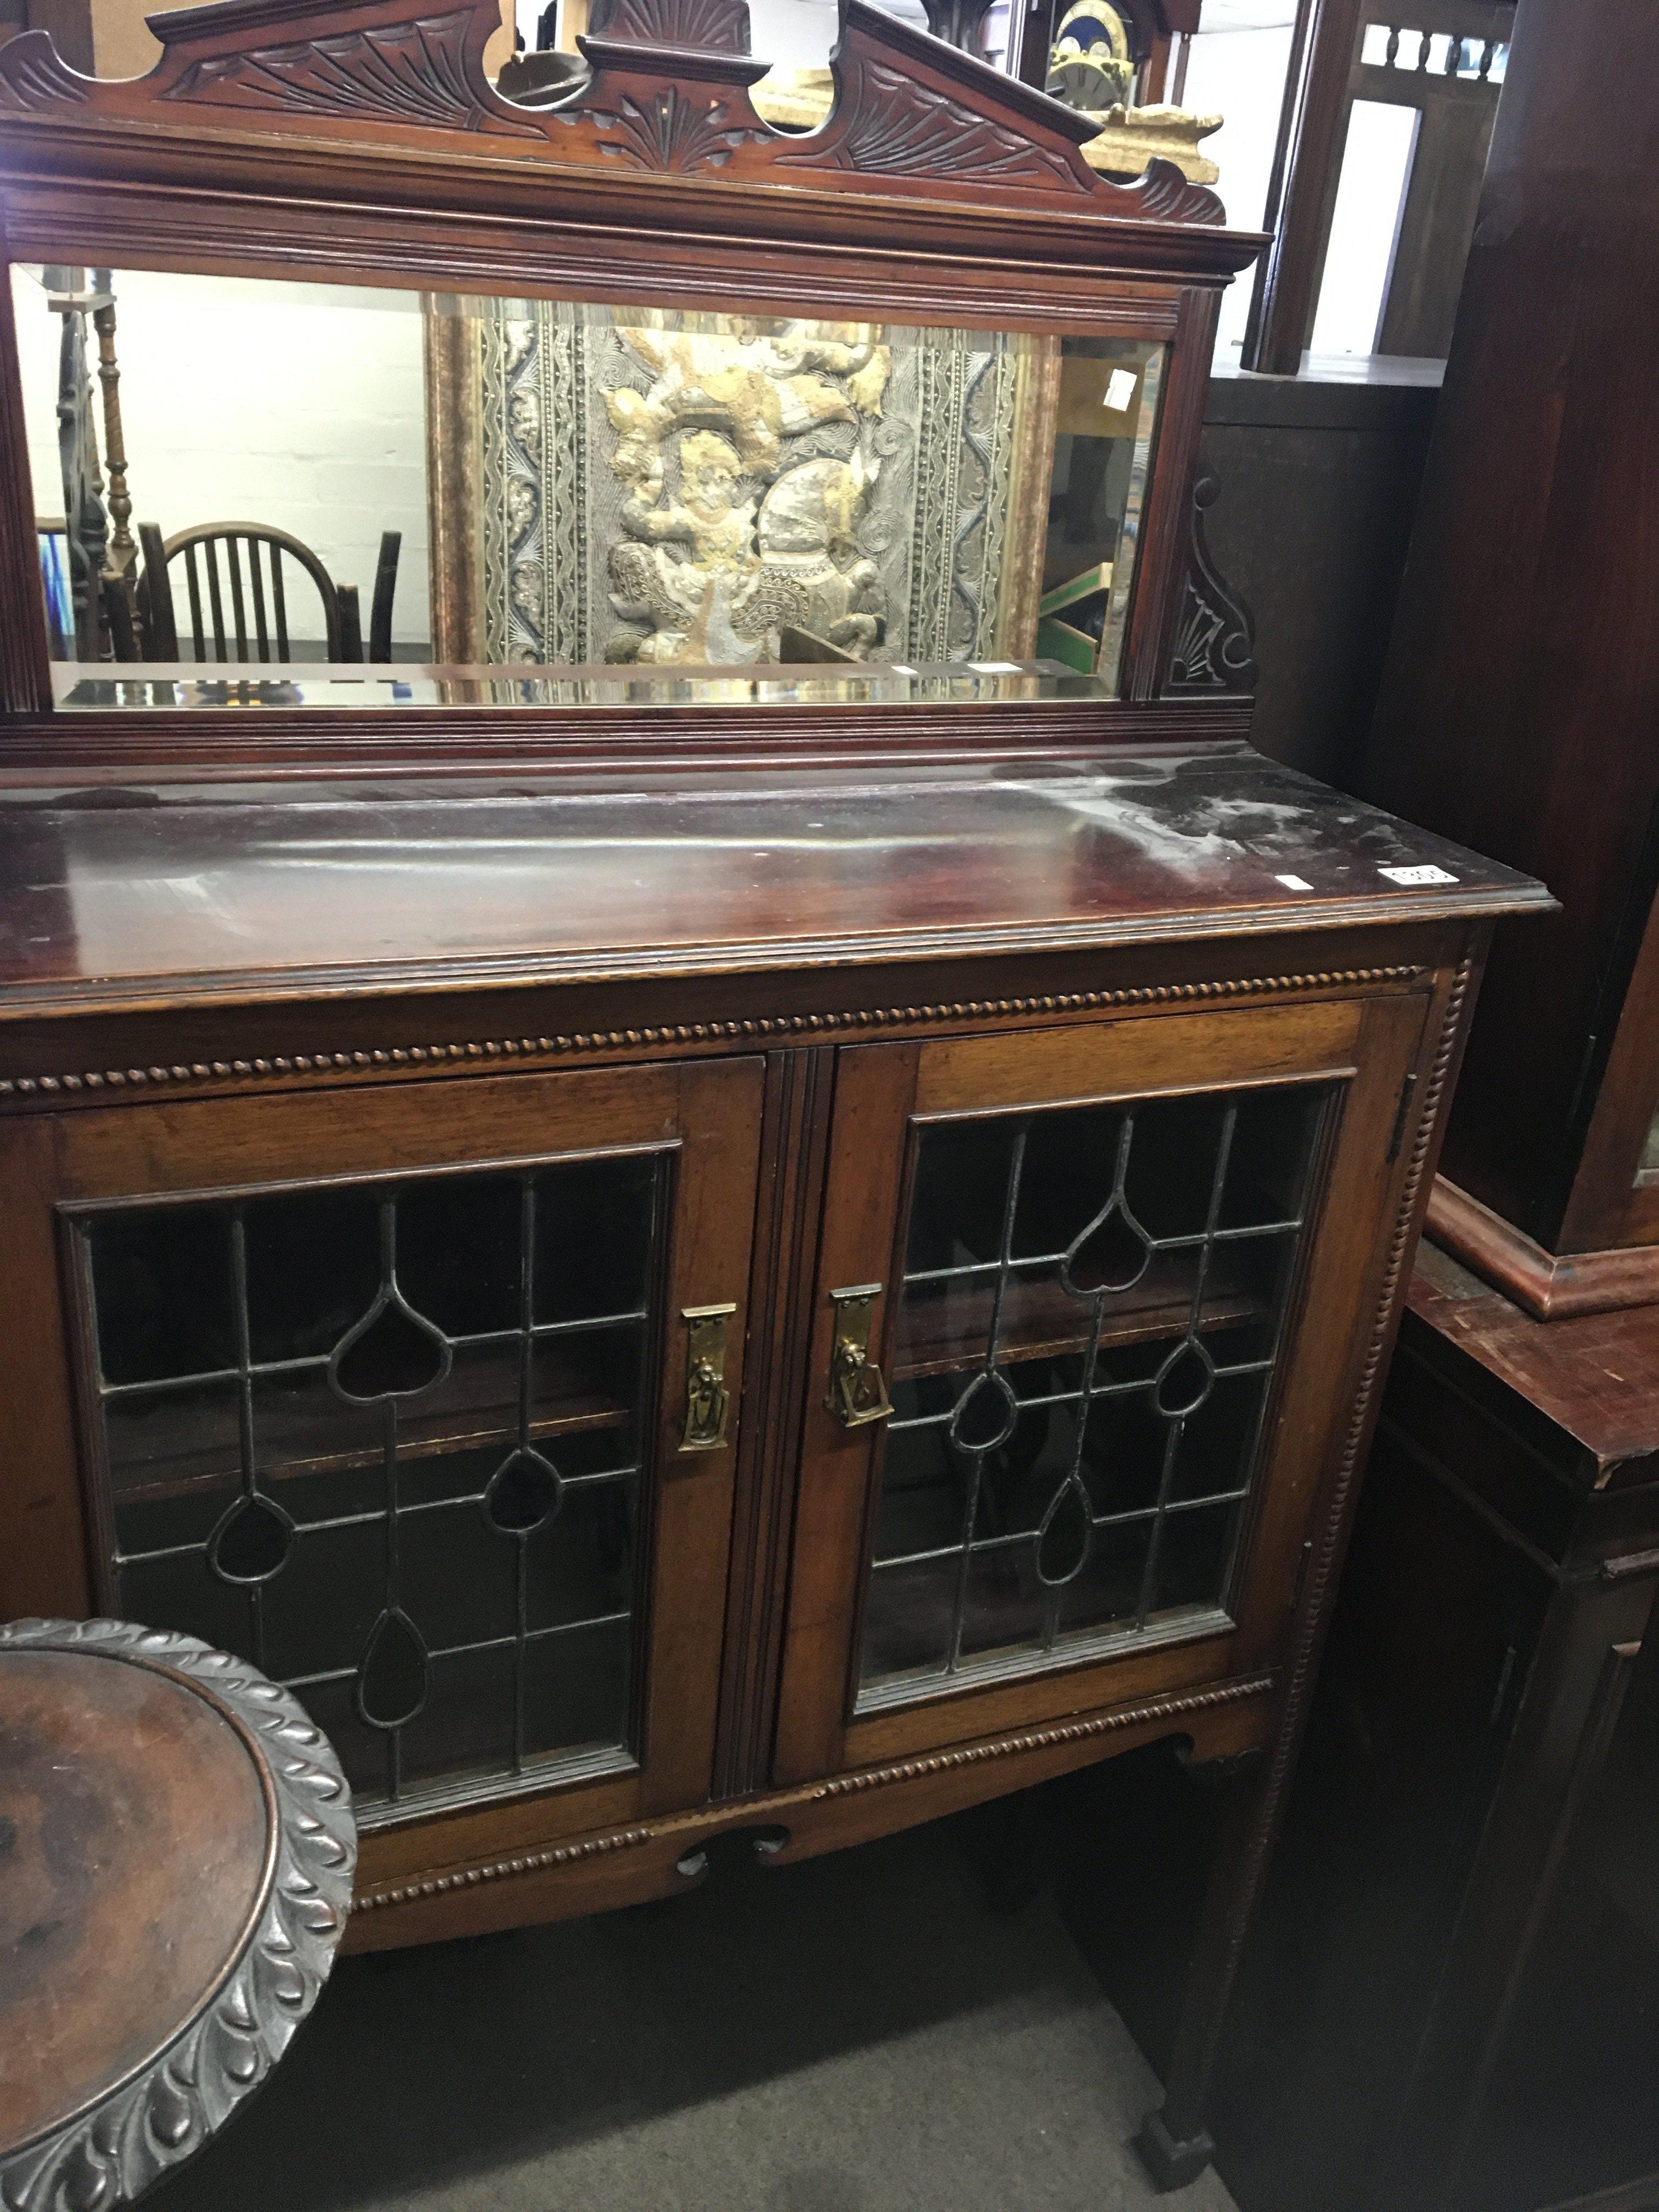 An Edwardian display cabinet with a mirrored back